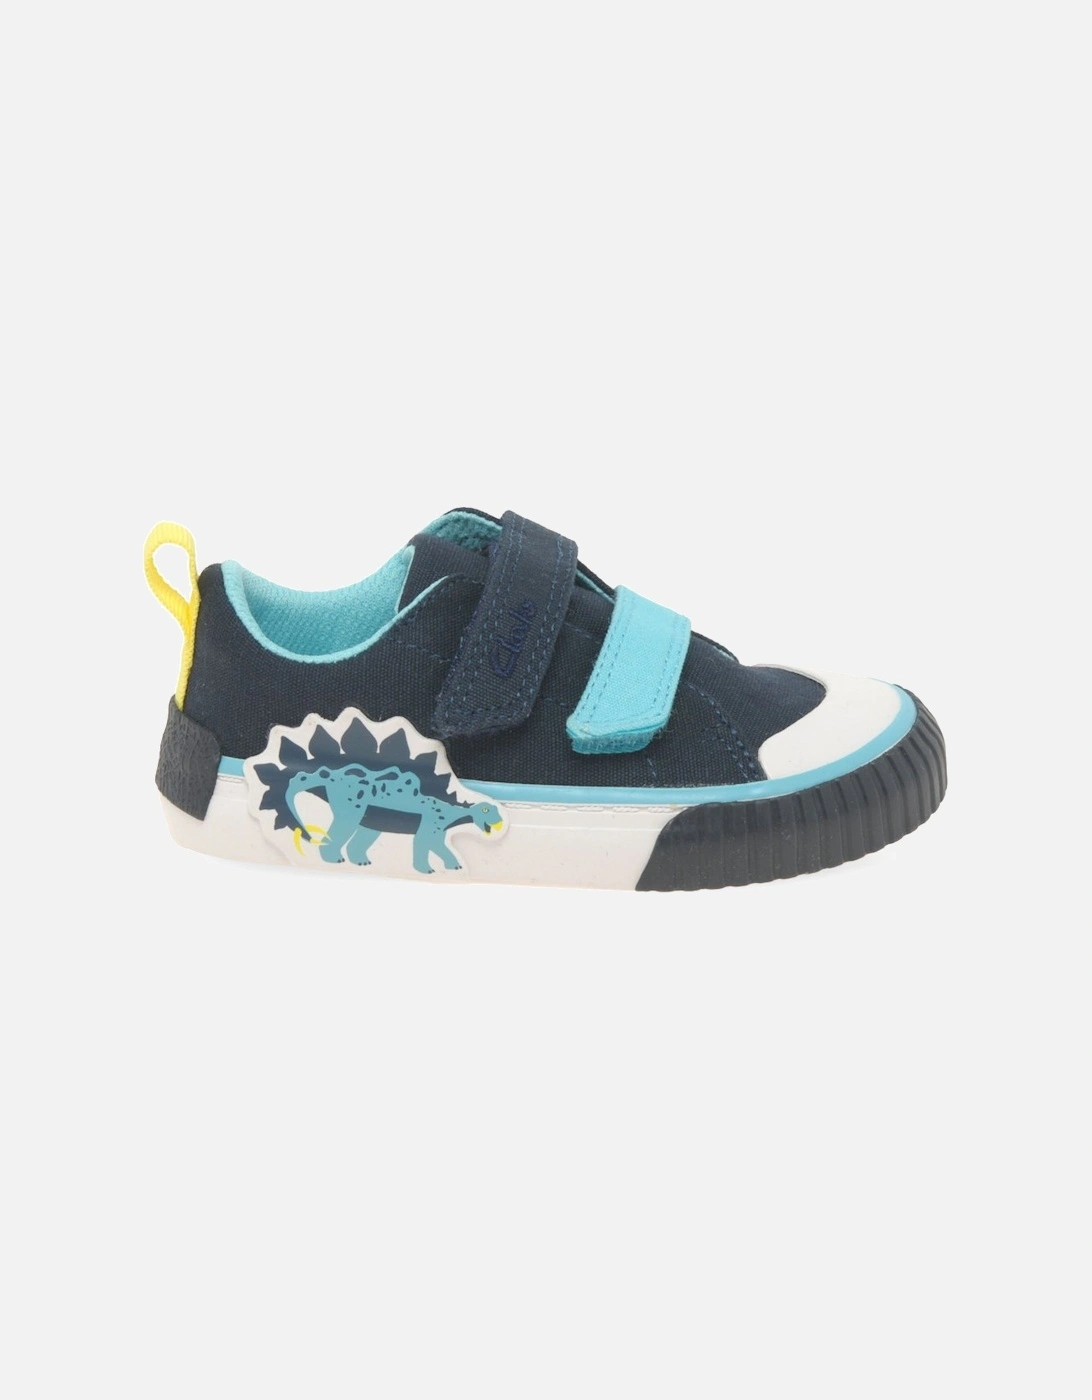 Foxing Tail T Boys Infant Canvas Shoes